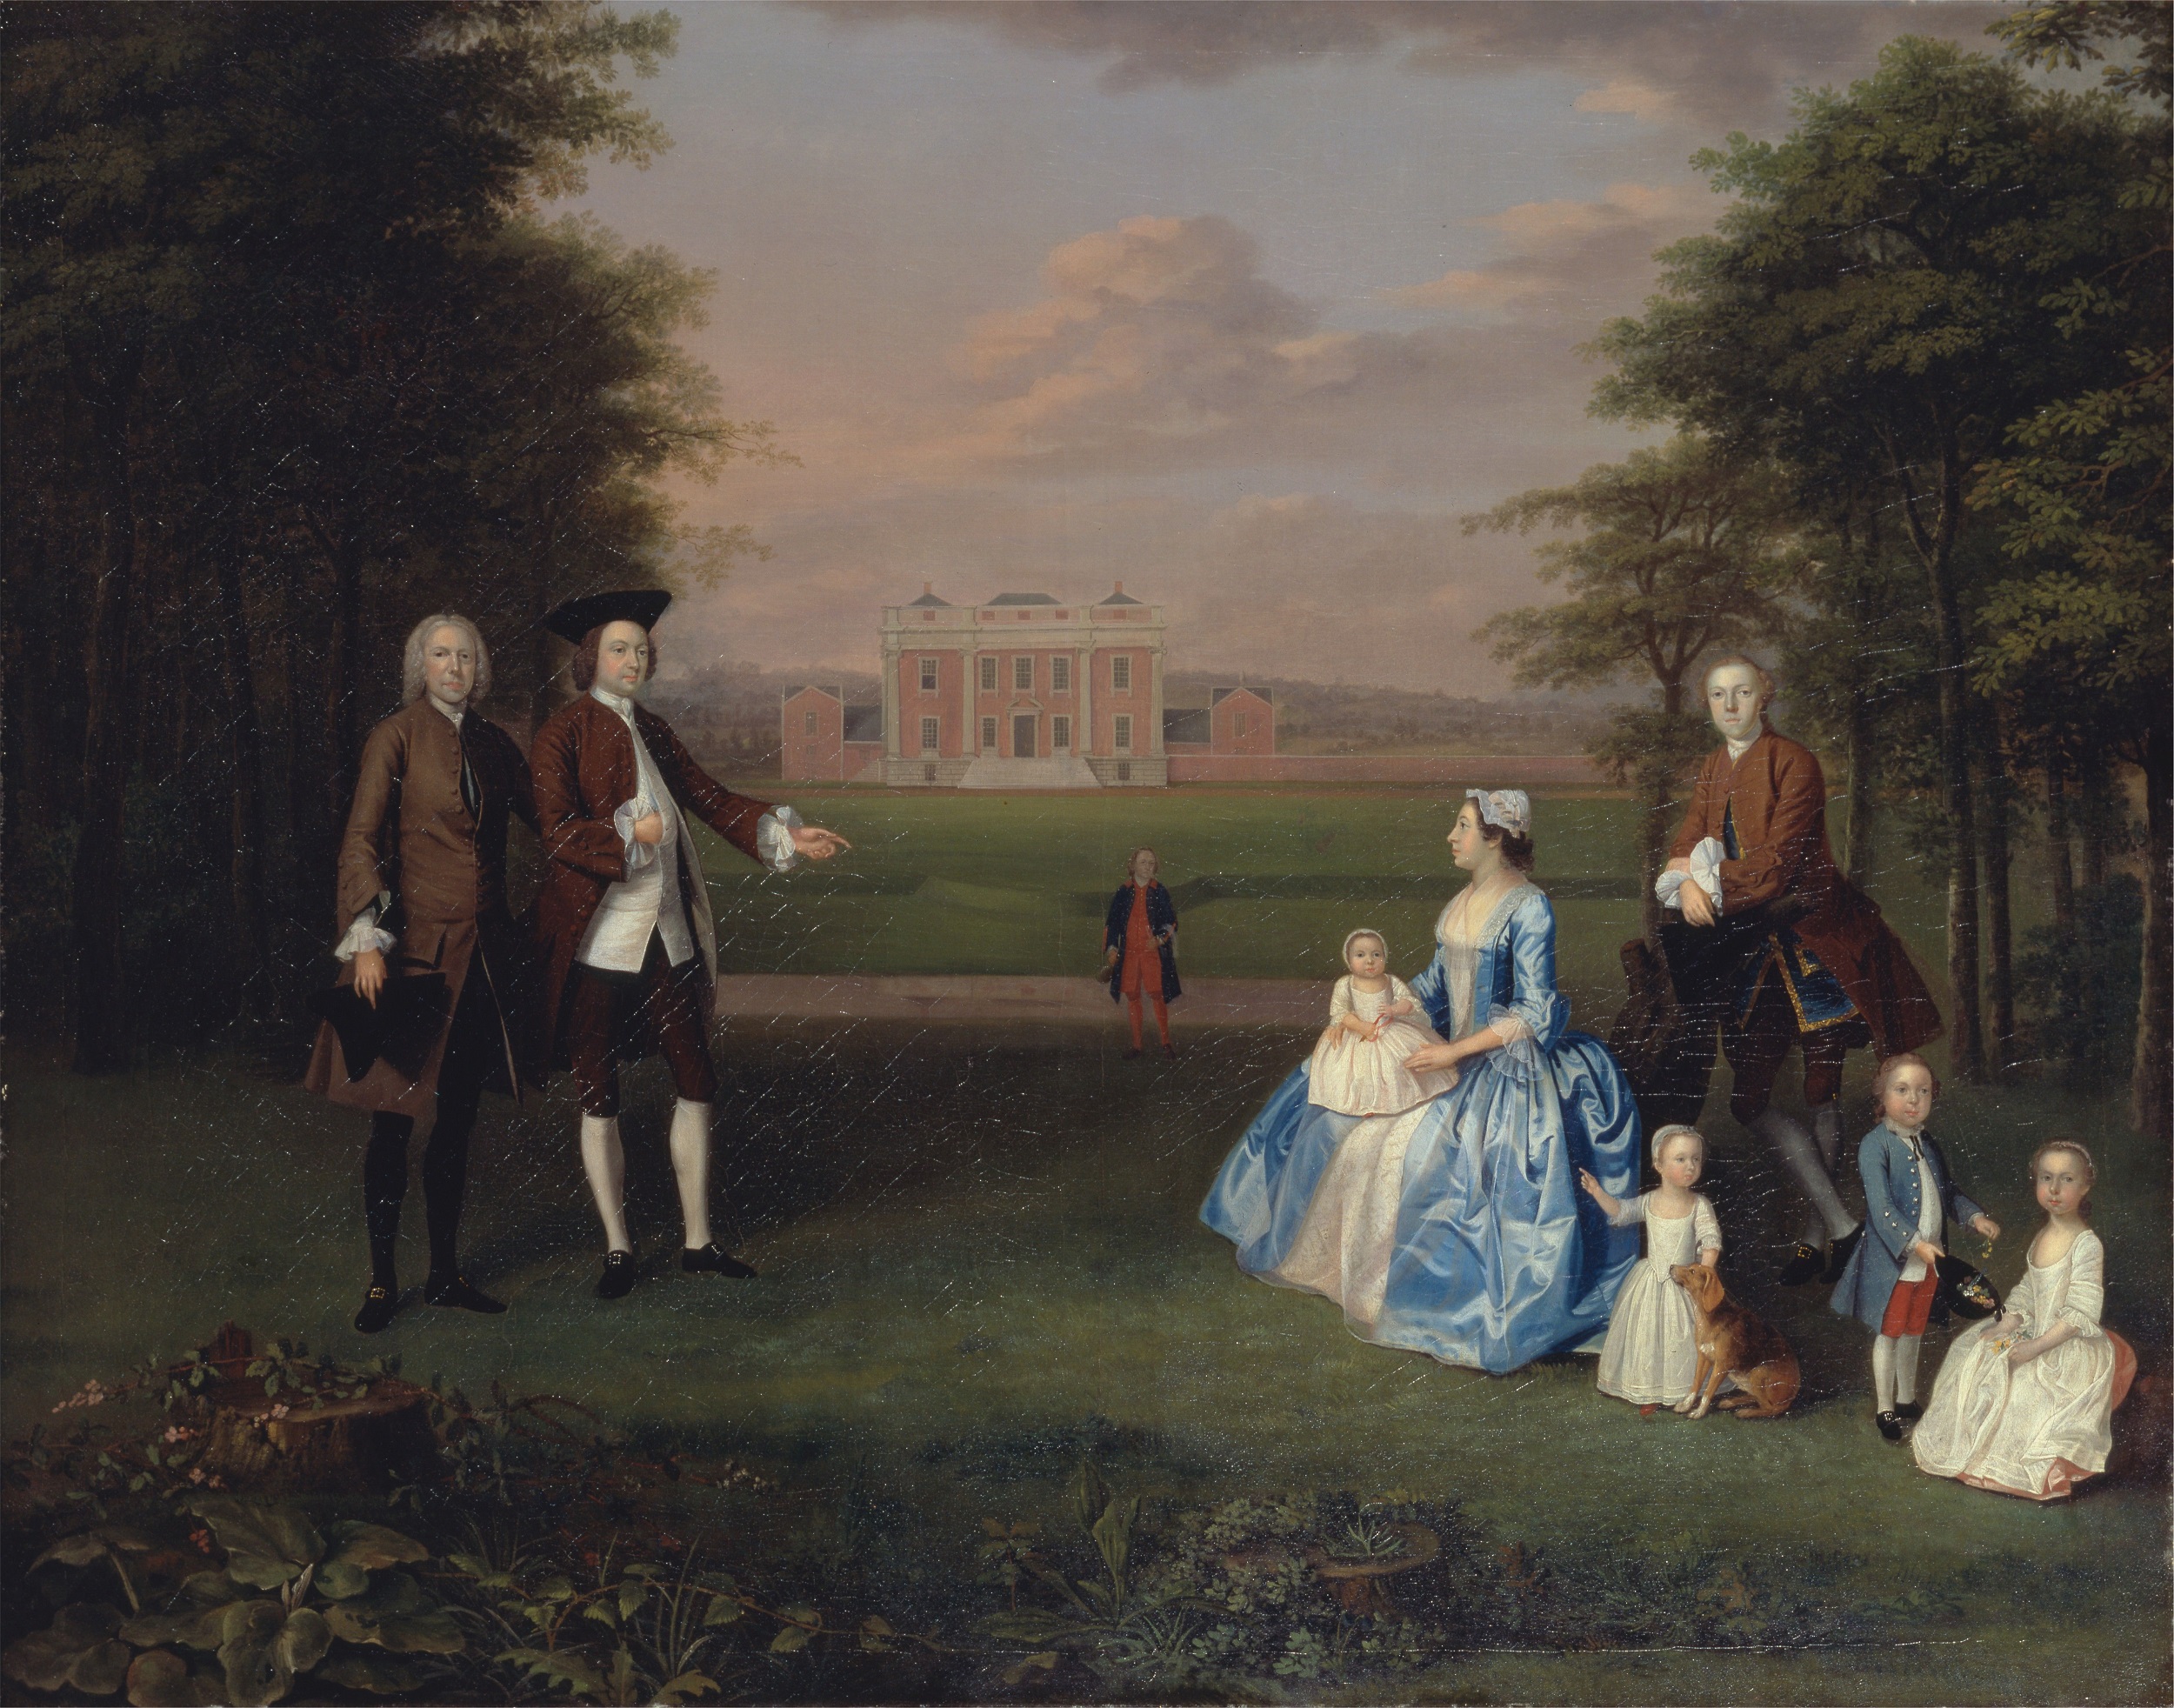 Oil painting of a European family with four men, one woman in a blue silk dress, and four children, seated in a landscape with a large estate in the background.